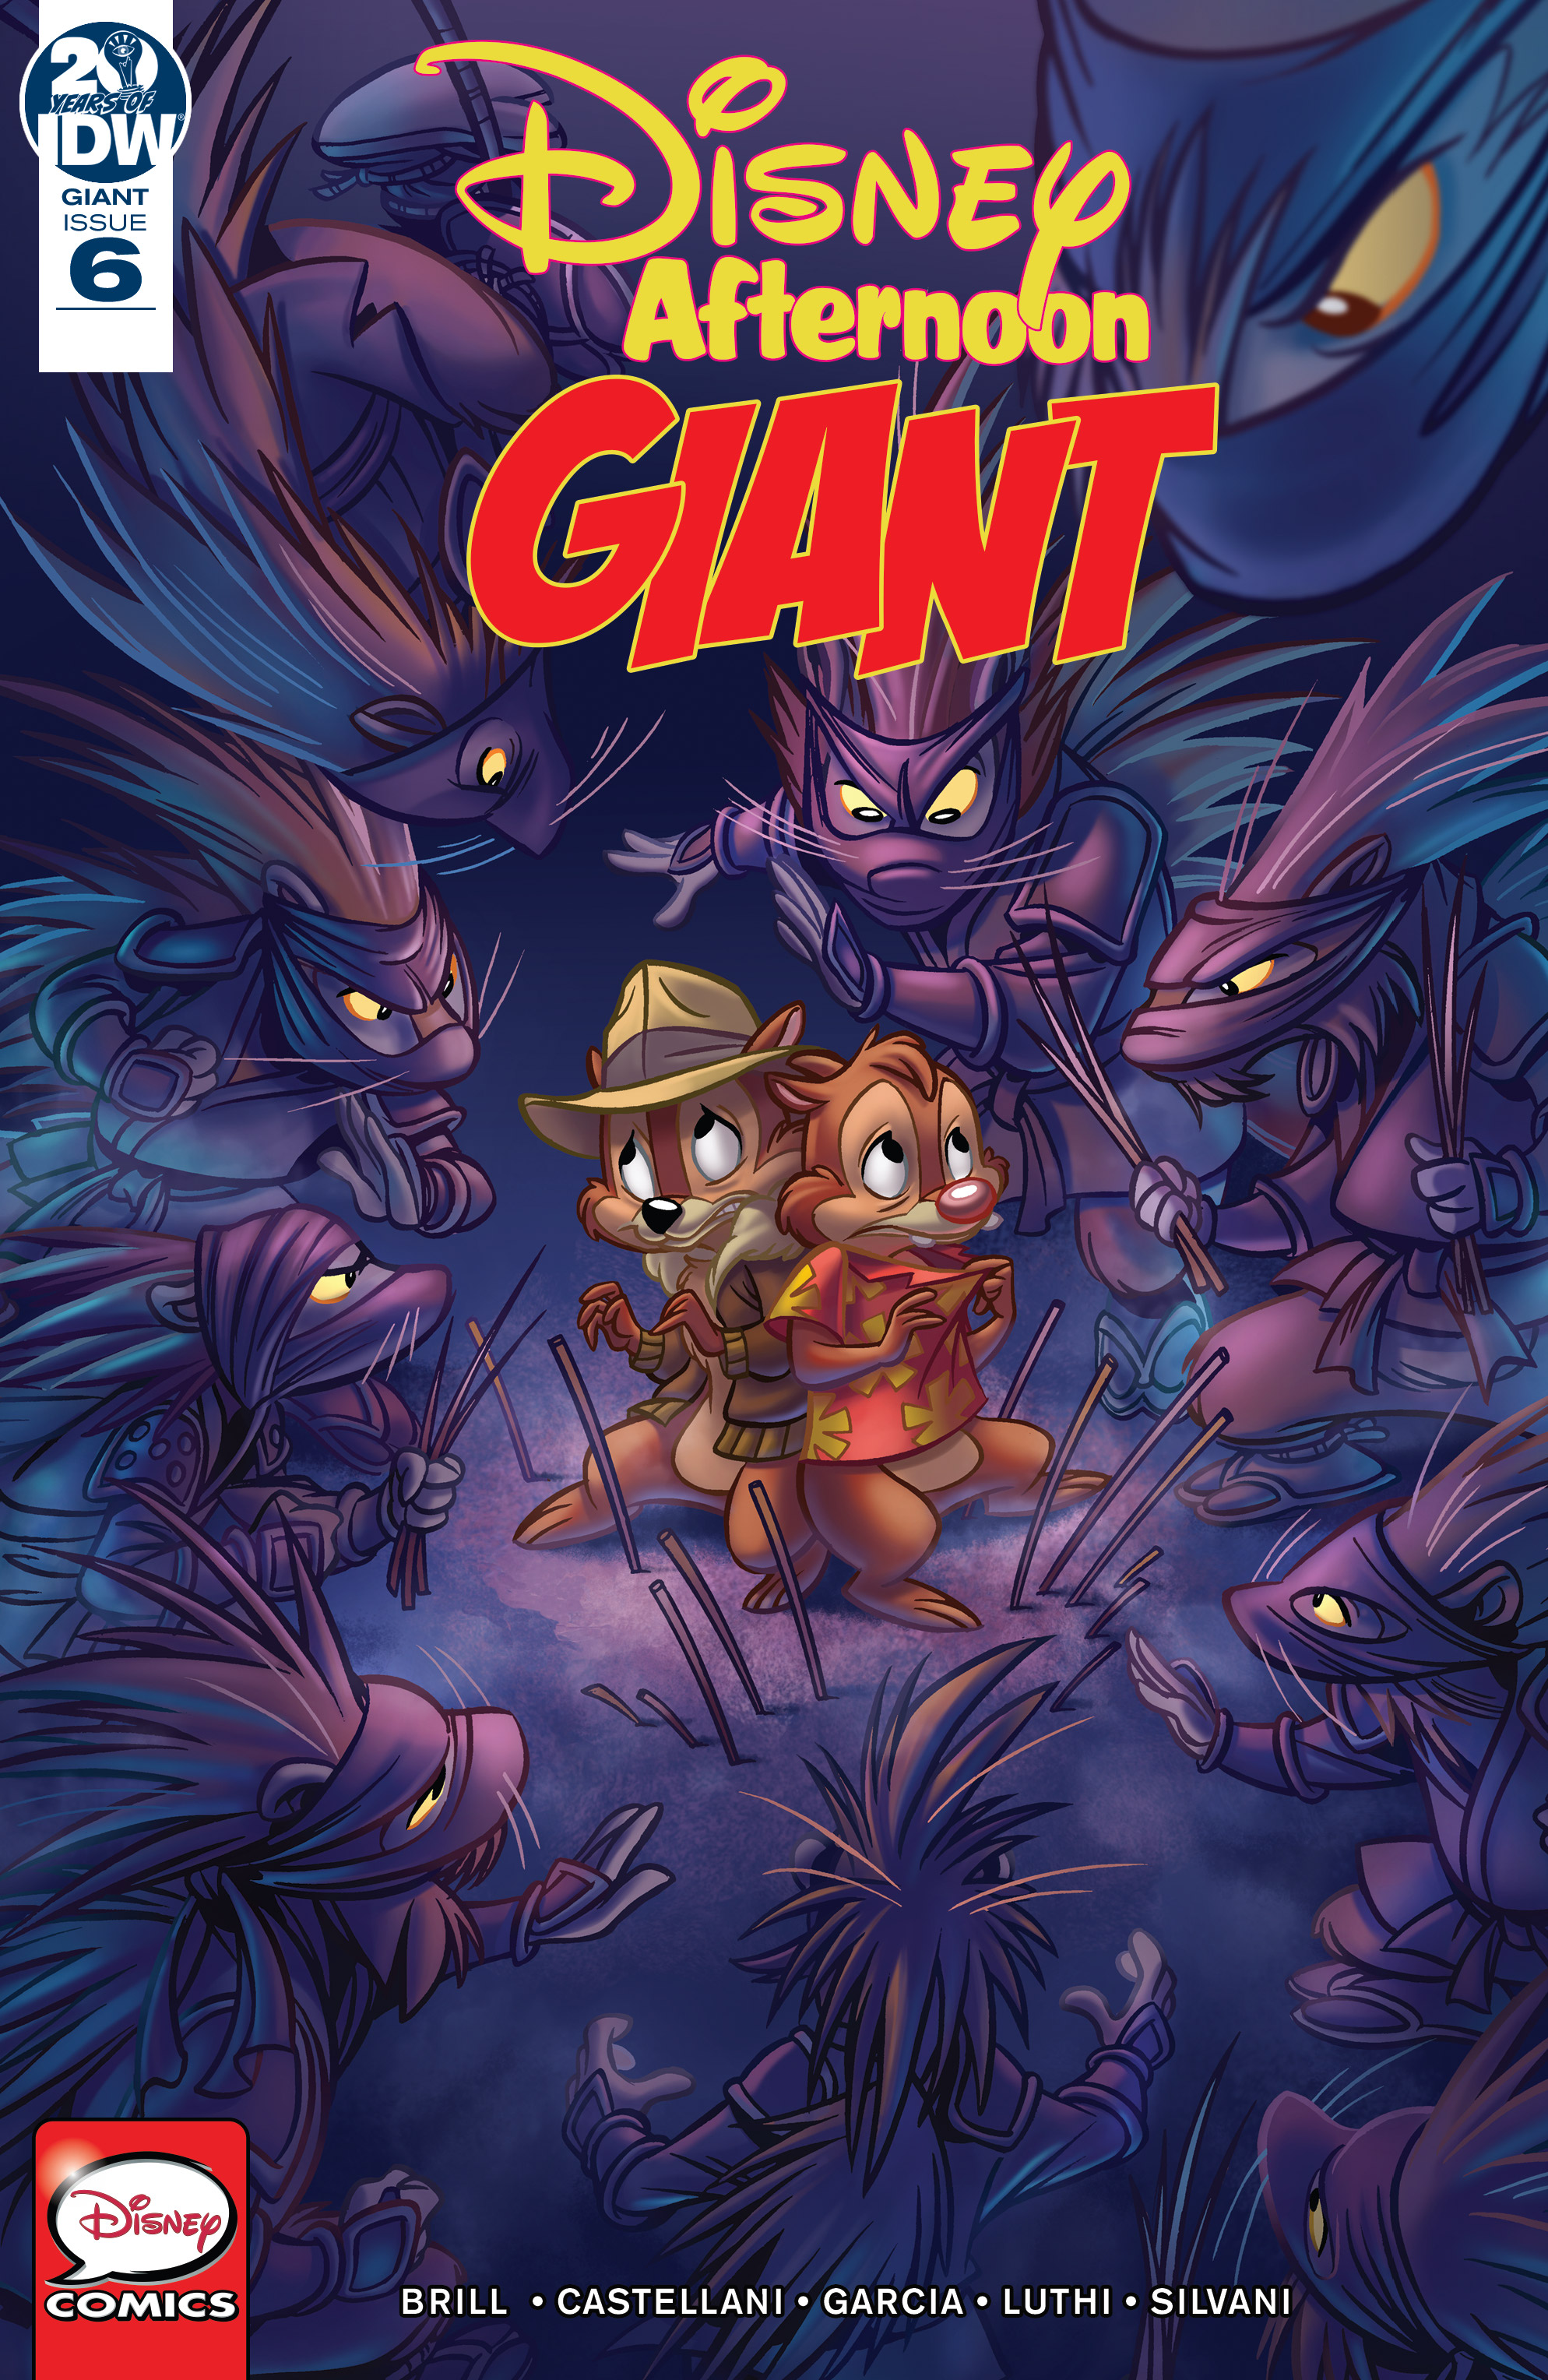 Read online Disney Afternoon Giant comic -  Issue #6 - 1